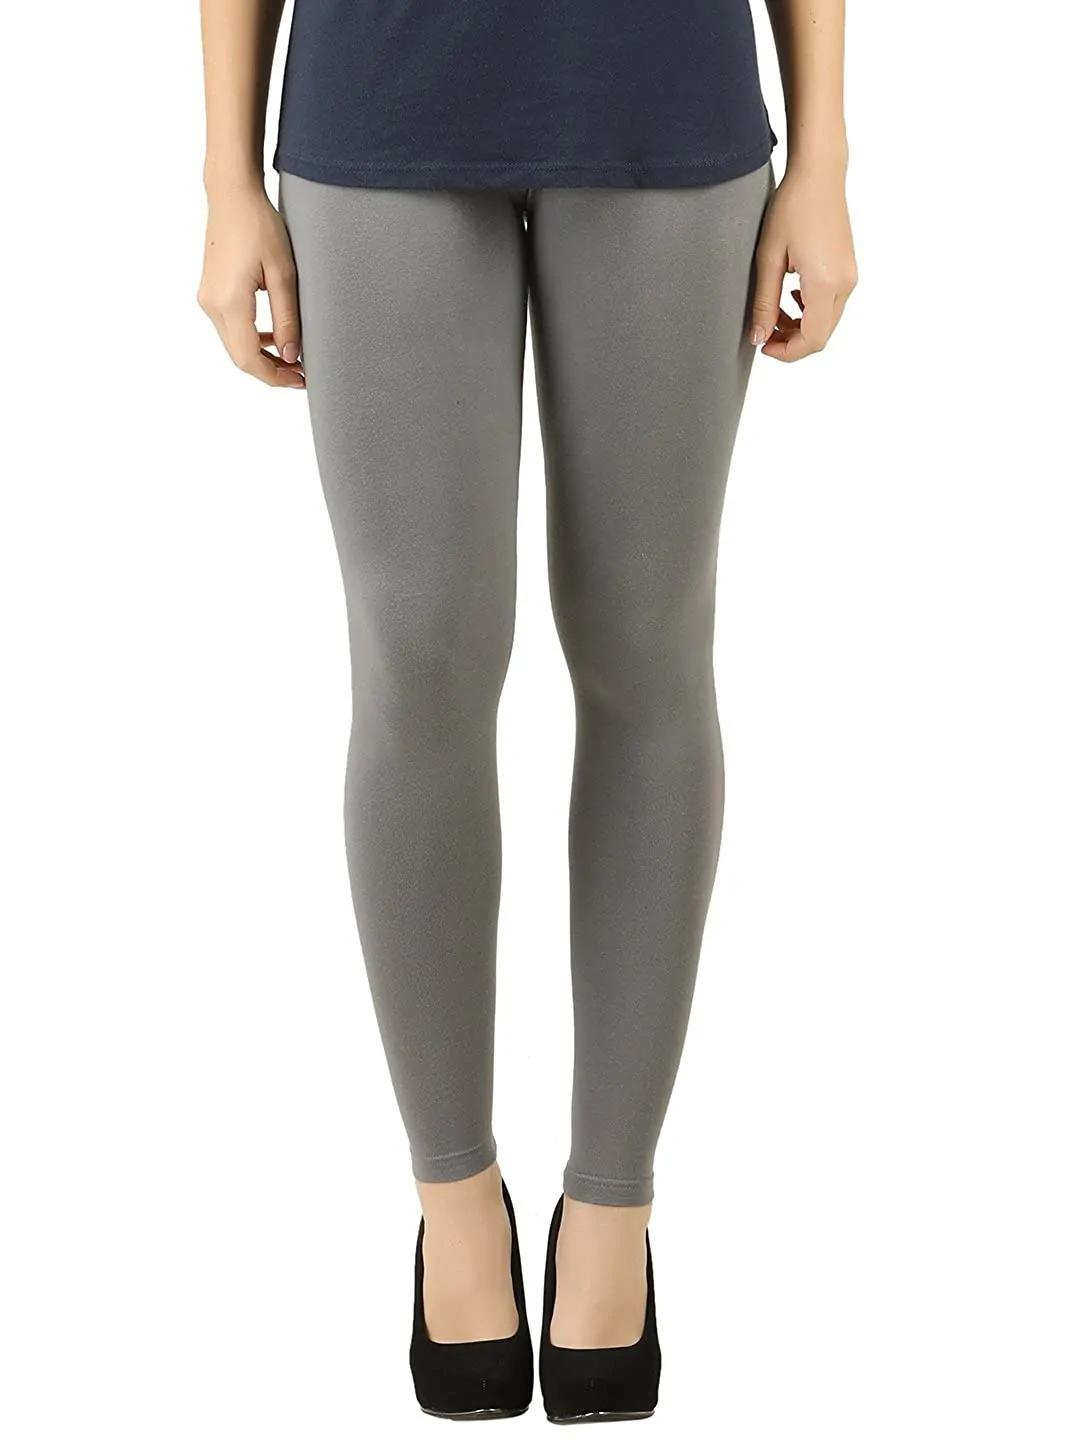 Silver Grey color stretchable cotton ankle Leggings-LGA53